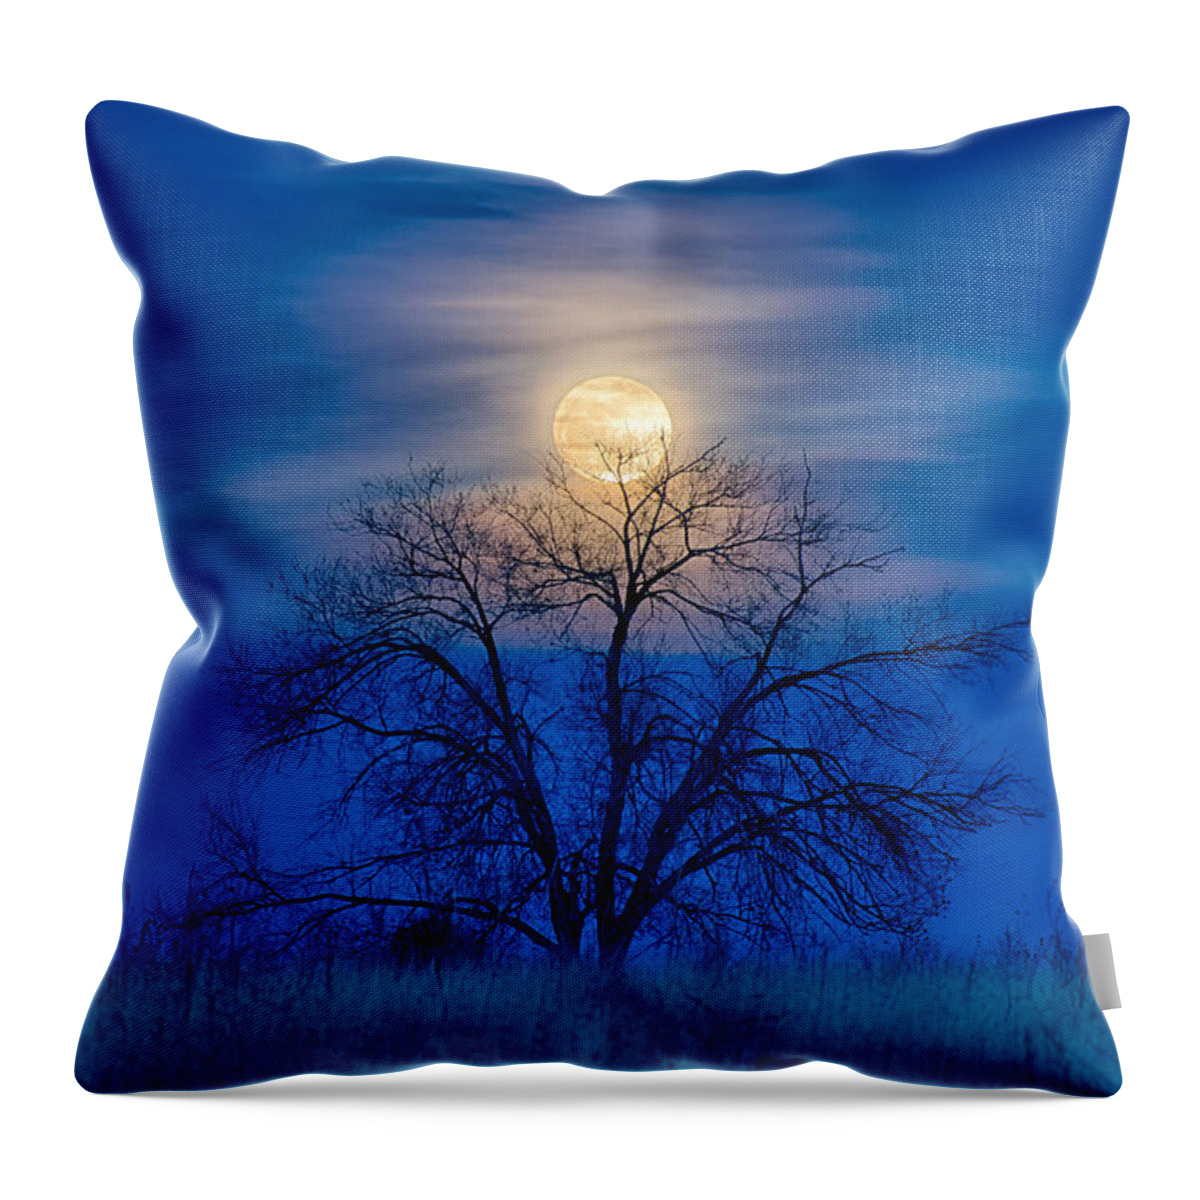 Moon Throw Pillow featuring the photograph Moonrise by David Soldano